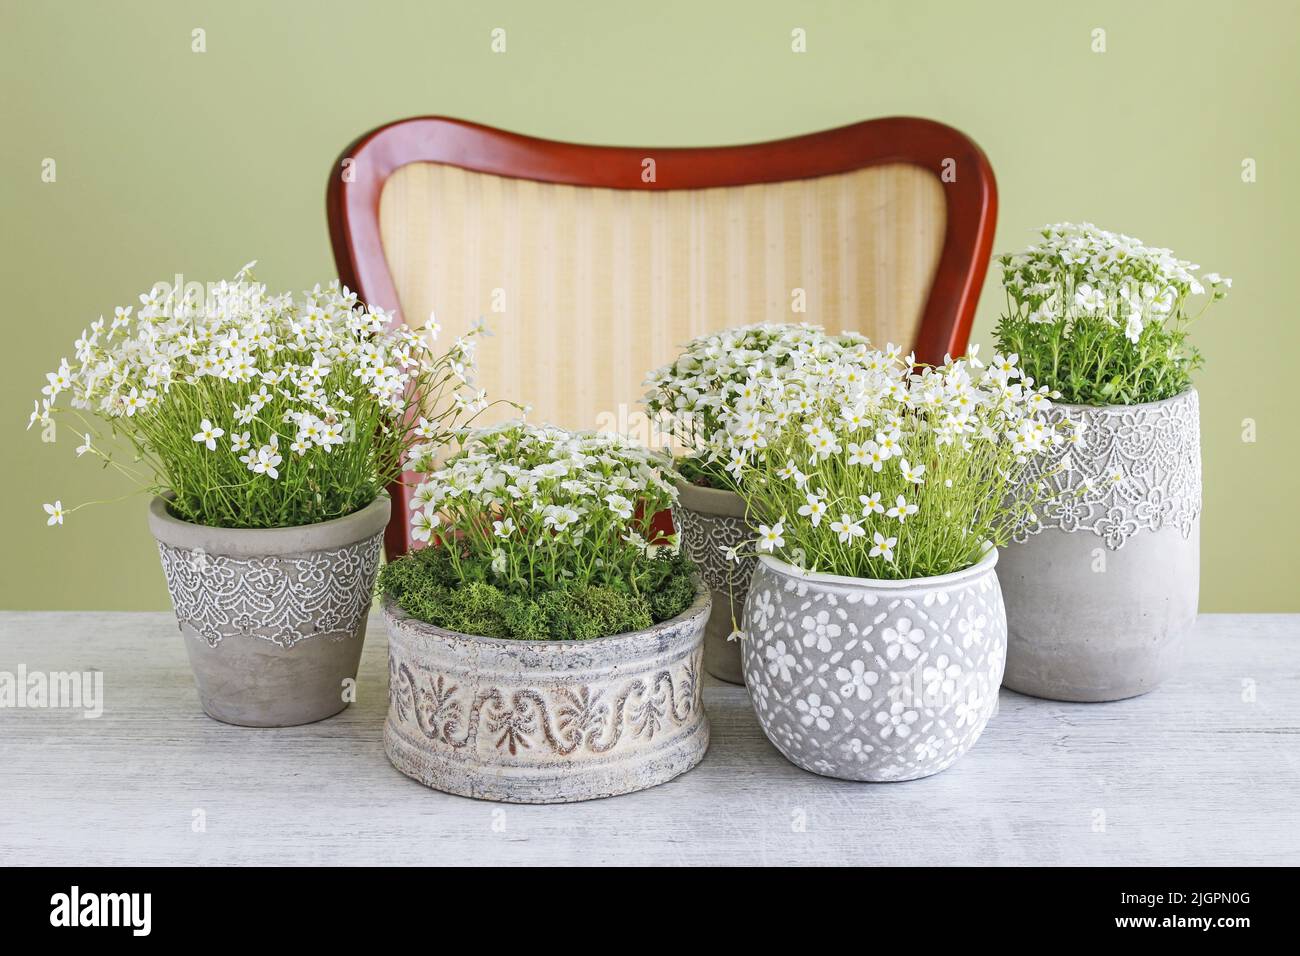 Luxurious chair and saxifraga arendsii (Schneeteppich) flowers. Home decor Stock Photo